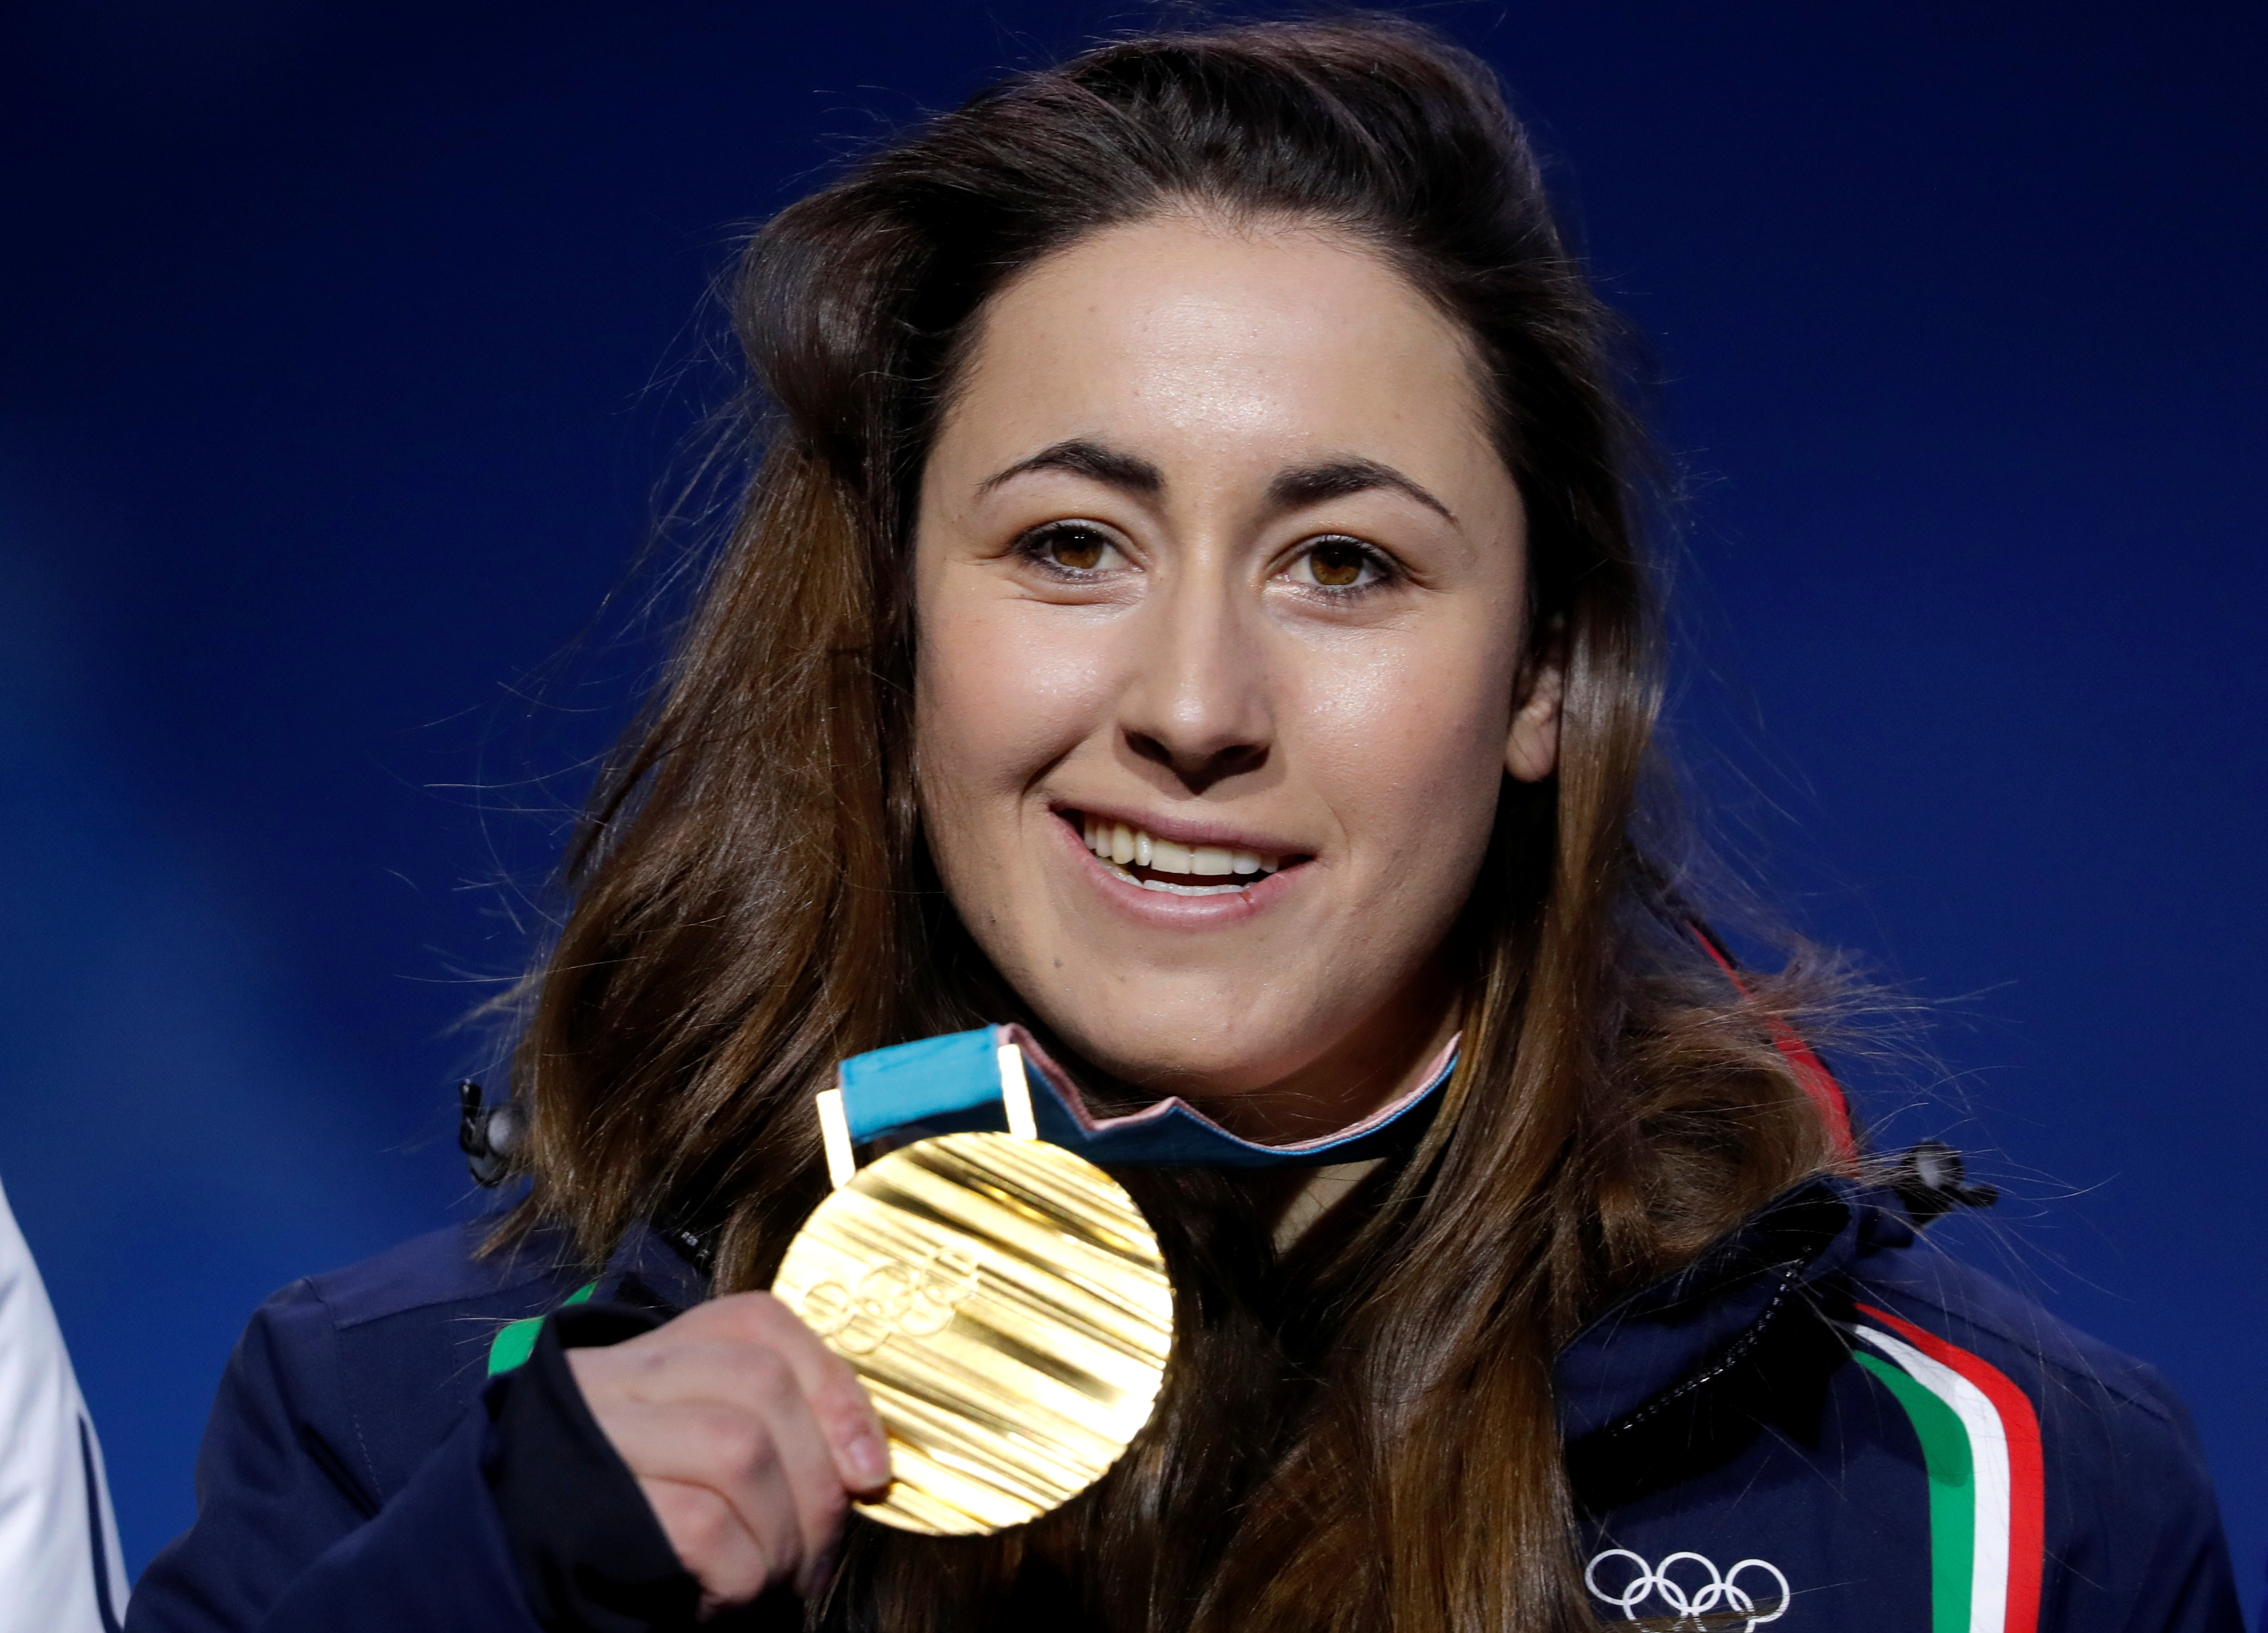 FILE PHOTO: Medals Ceremony - Alpine Skiing - Pyeongchang 2018 Winter Olympics - Women's Downhill - Medals Plaza - Pyeongchang, South Korea - February 21, 2018 - Gold medalist Sofia Goggia of Italy on the podium. REUTERS/Eric Gaillard/File Photo